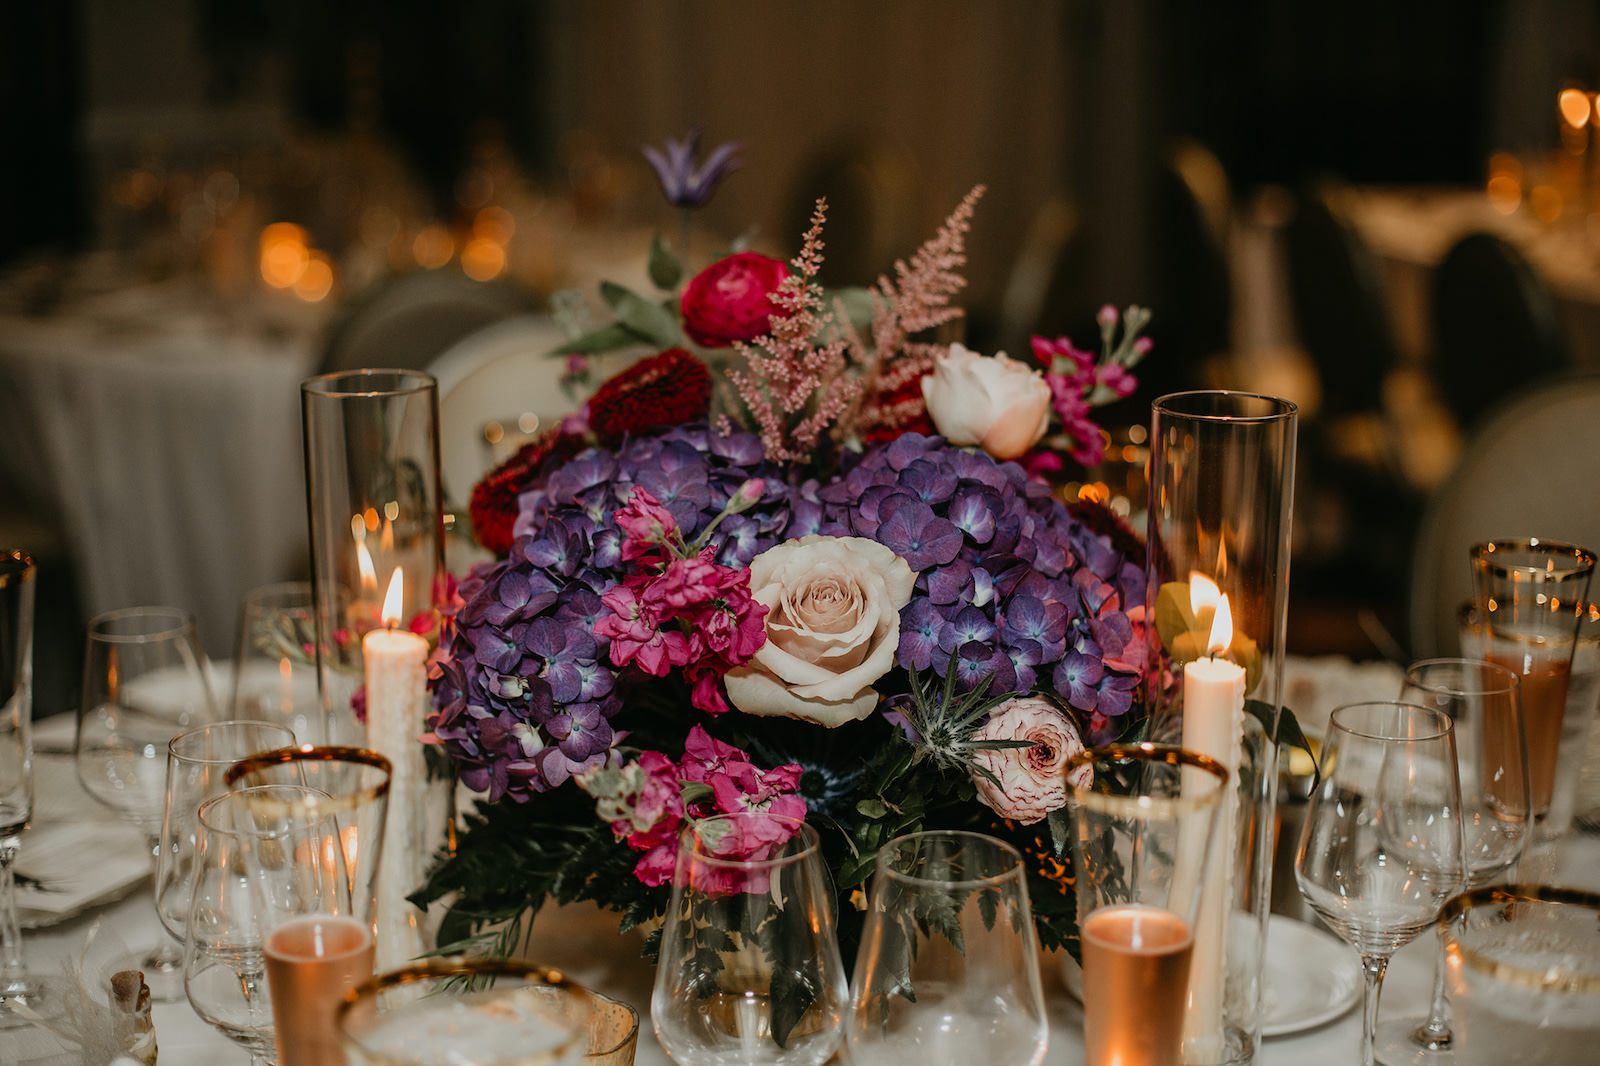 Wedding Centerpiece Inspiration | Low Compote Centerpiece with Floral Arrangement of Purple Hydrangea, Blush Pink Astilbe and Stock, Deep Red Burgundy Ranunculus and Greenery with Taper Candles